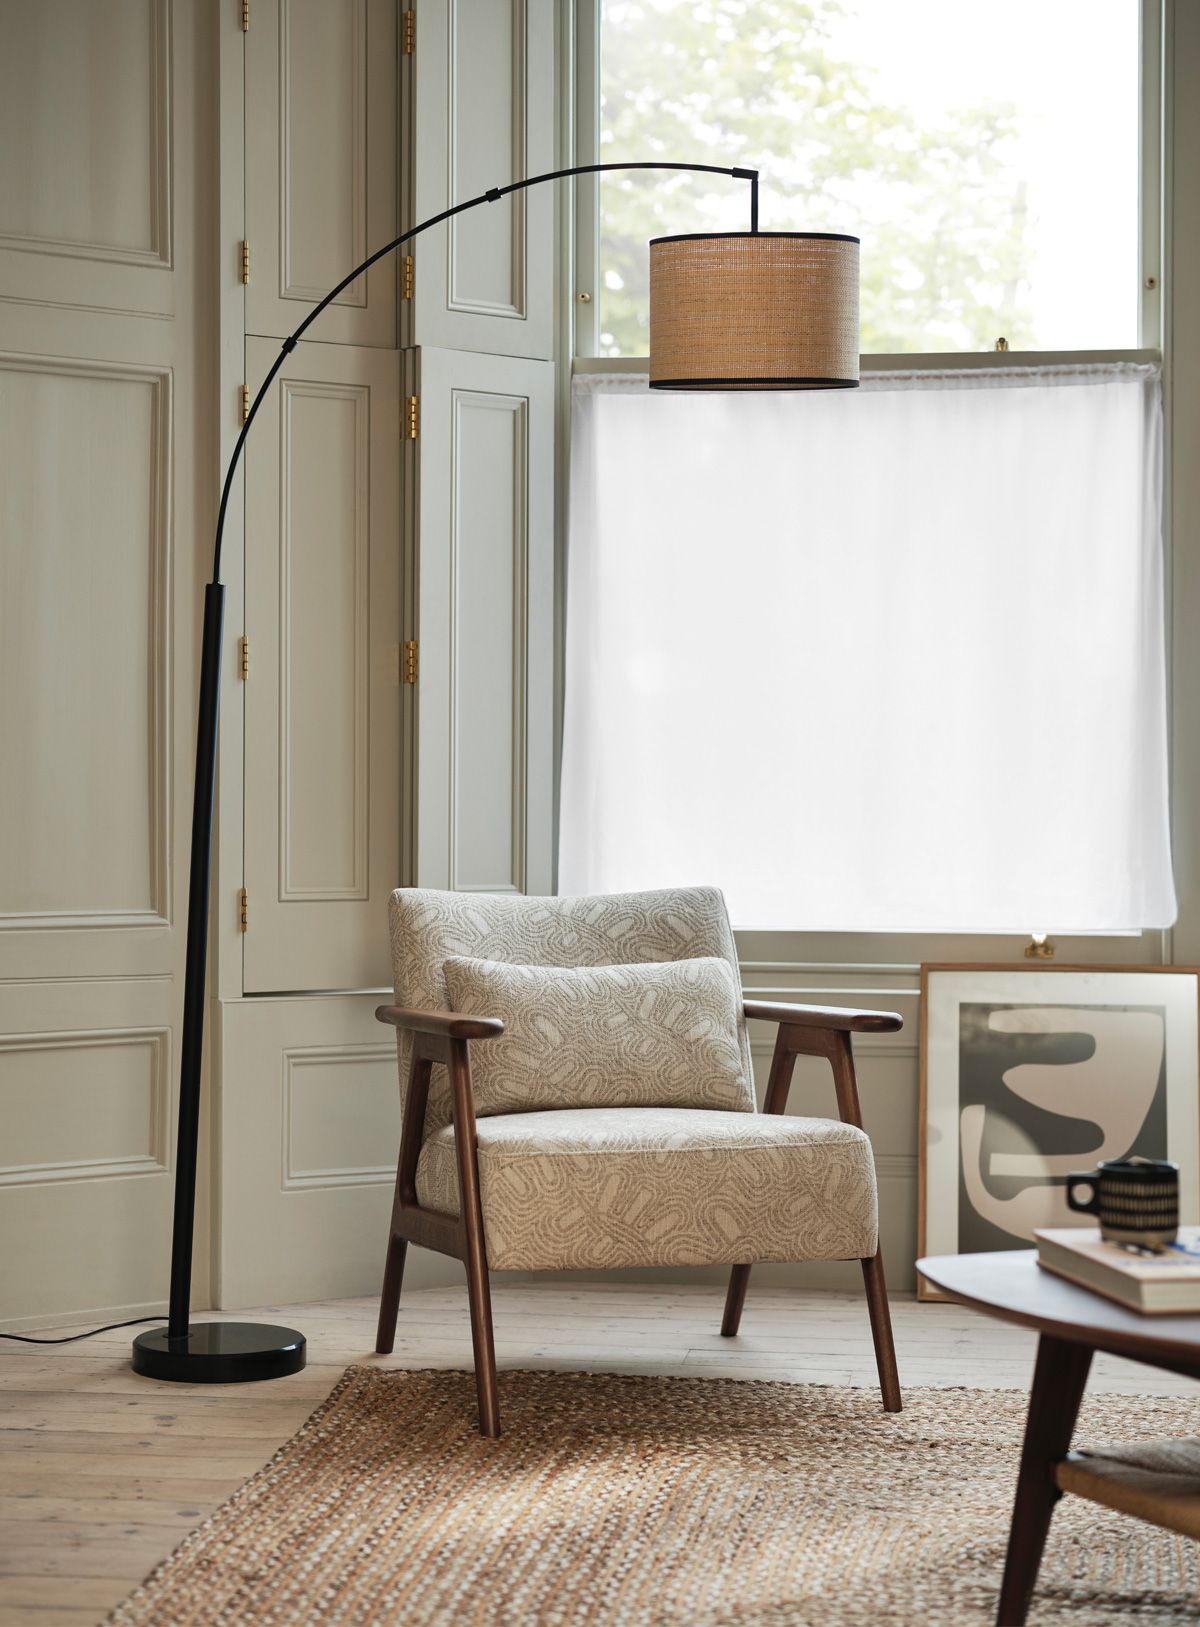 Image of a freestanding lamp in a living room scene